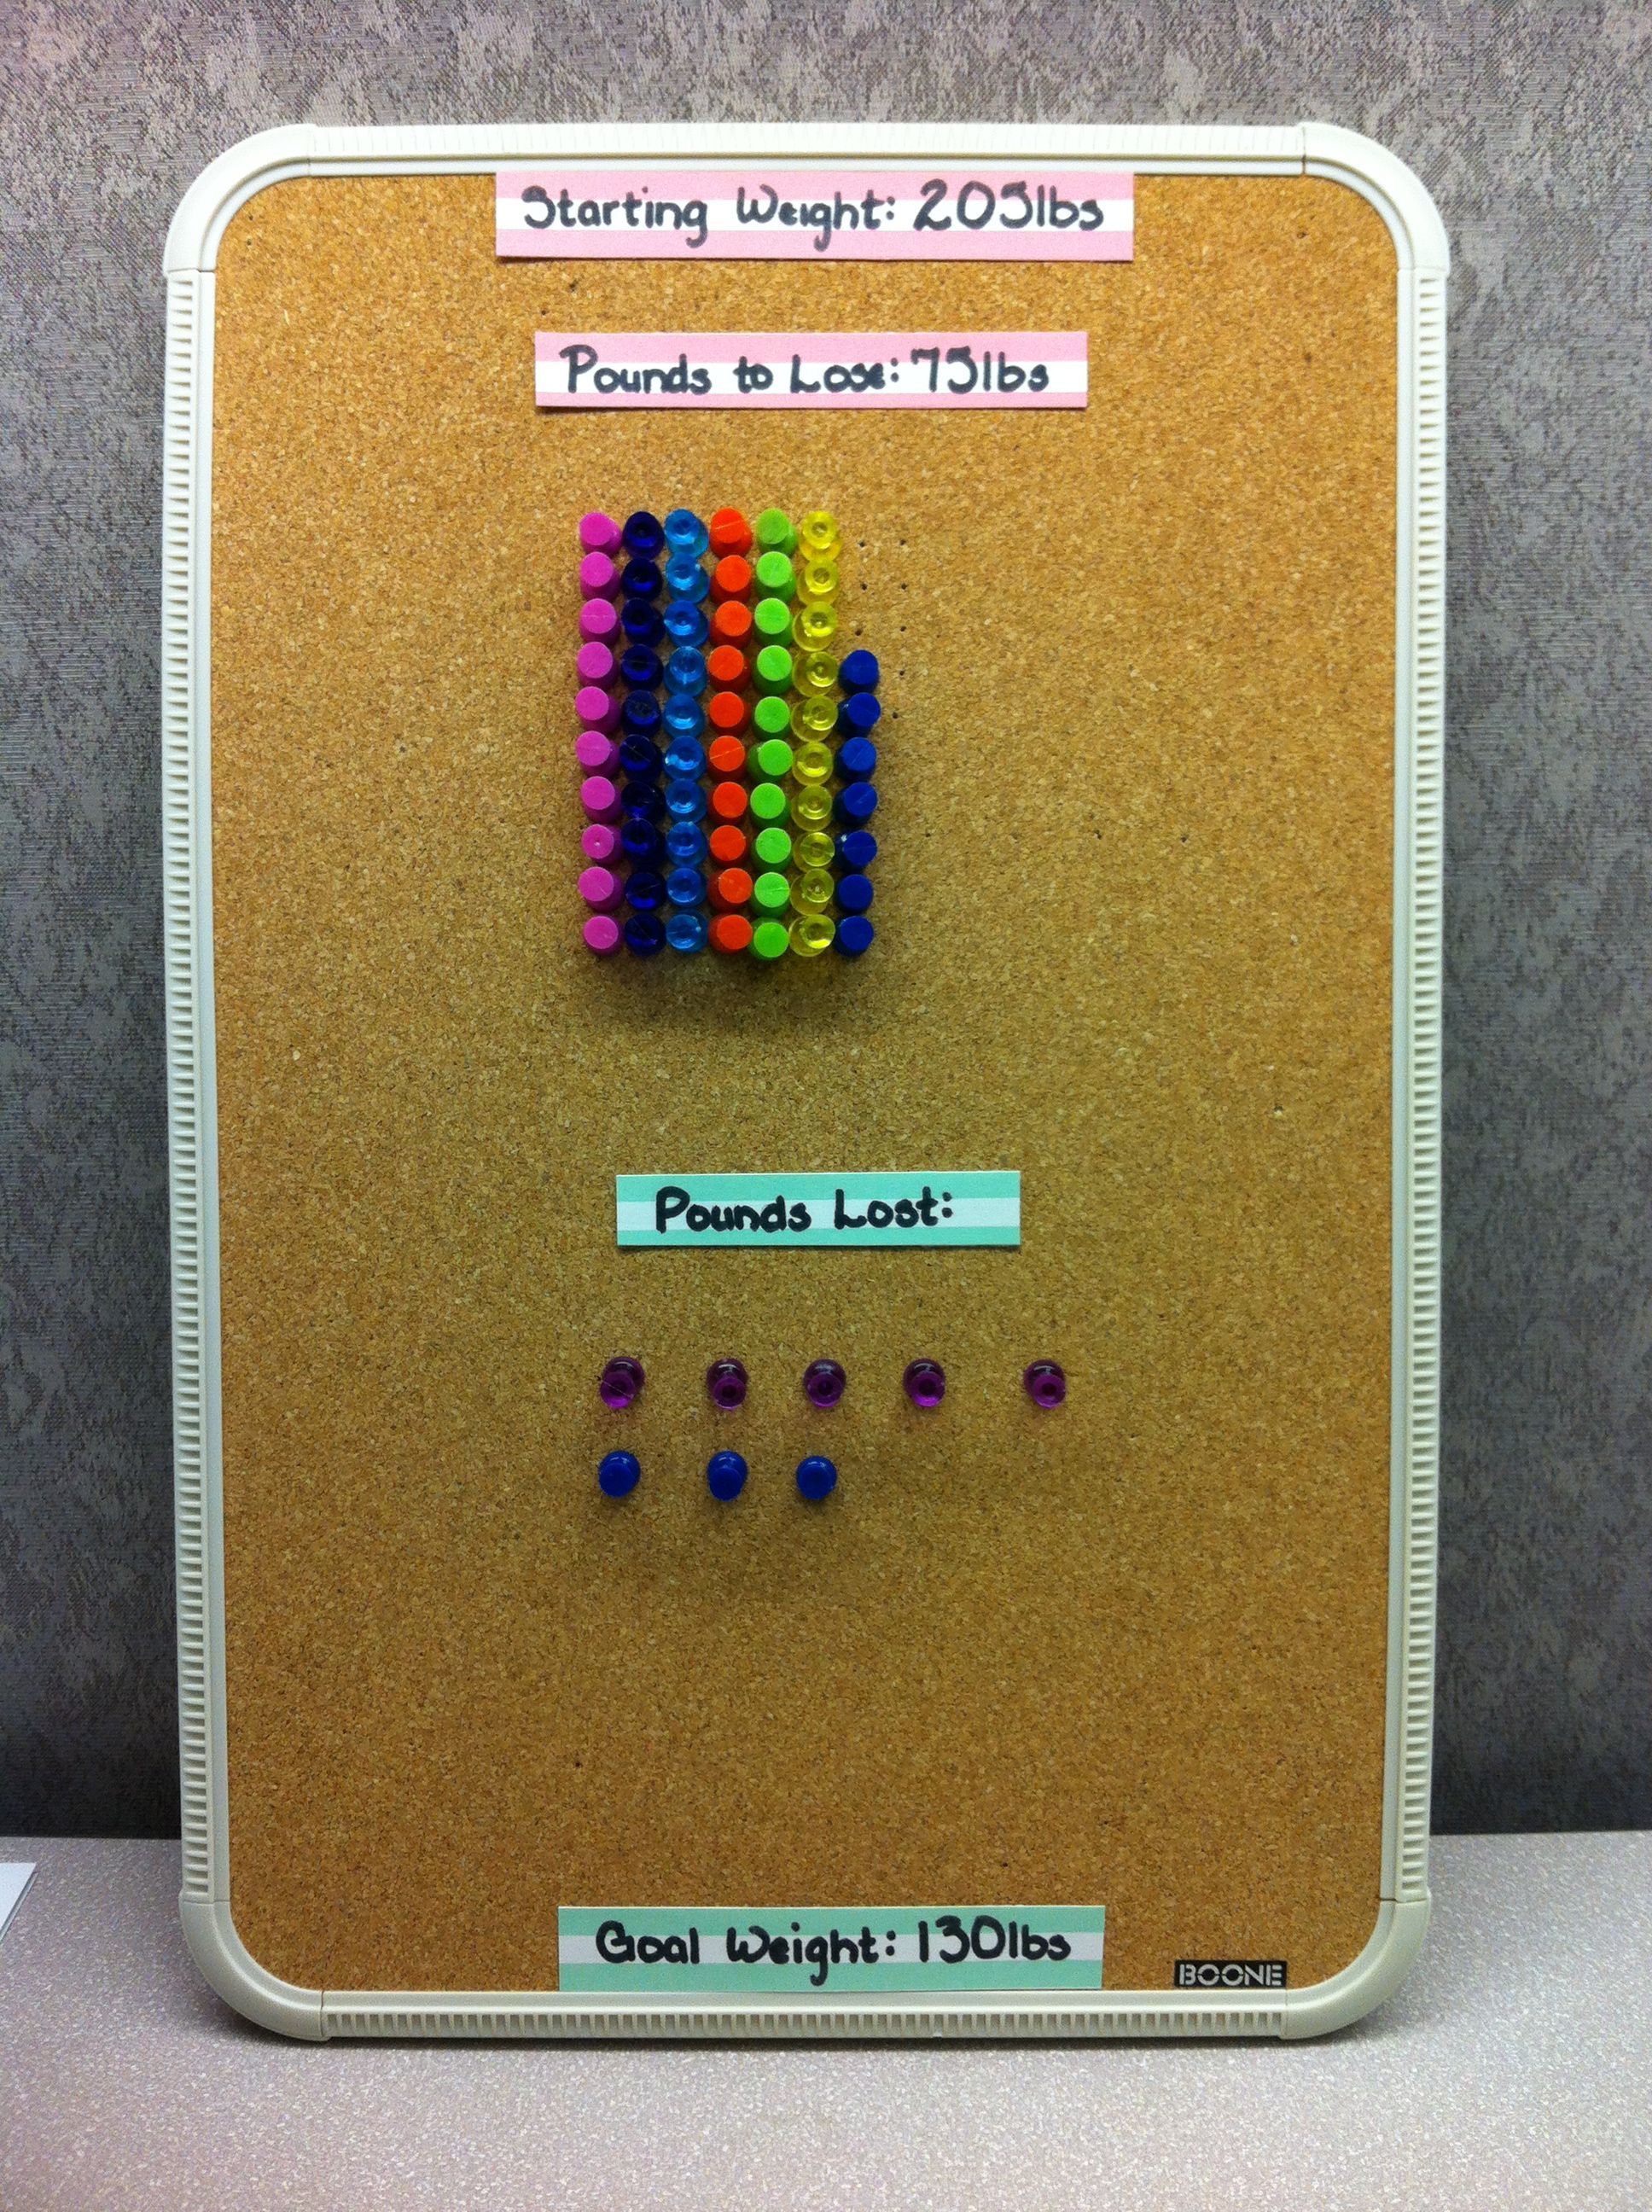 A visual done with pushpins= pounds  to lose and pounds lost- move the push pins as you lose! I like these visuals so much- with